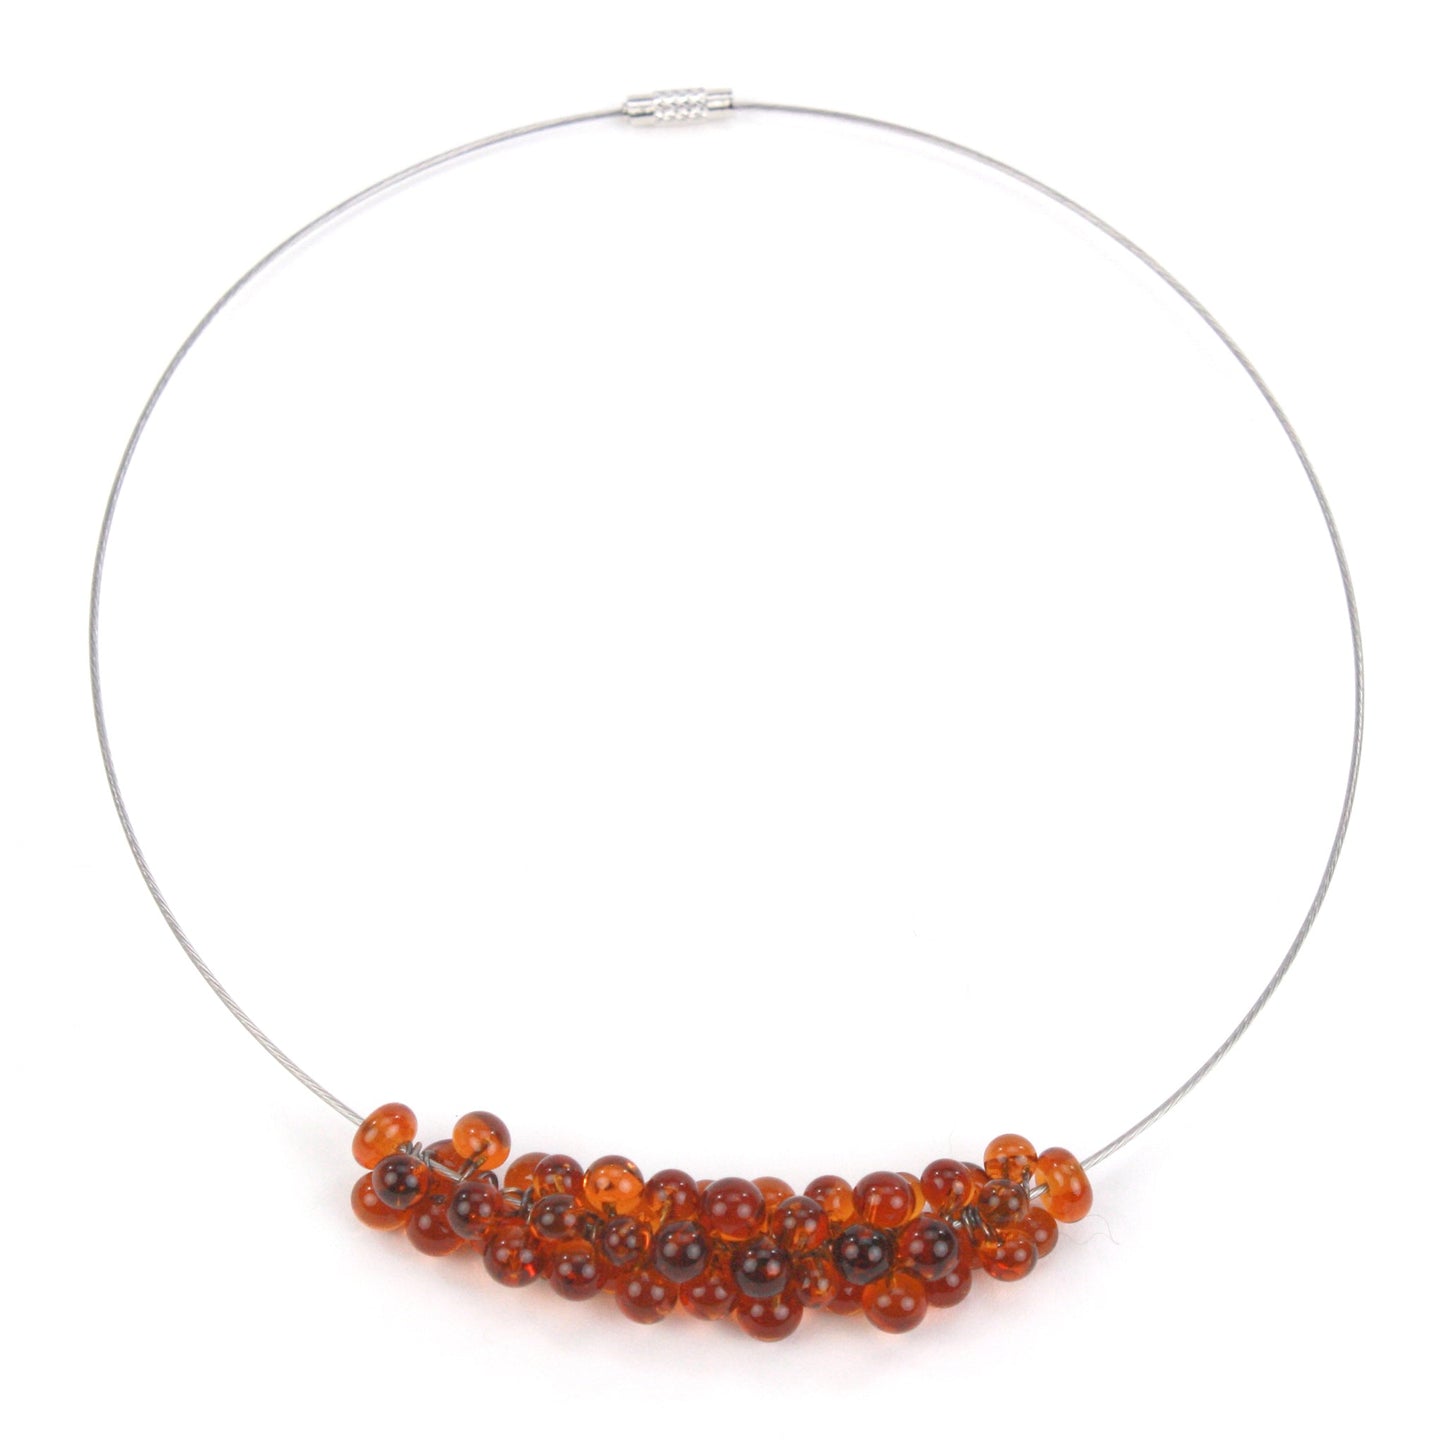 Petite Chroma Necklace in Amber